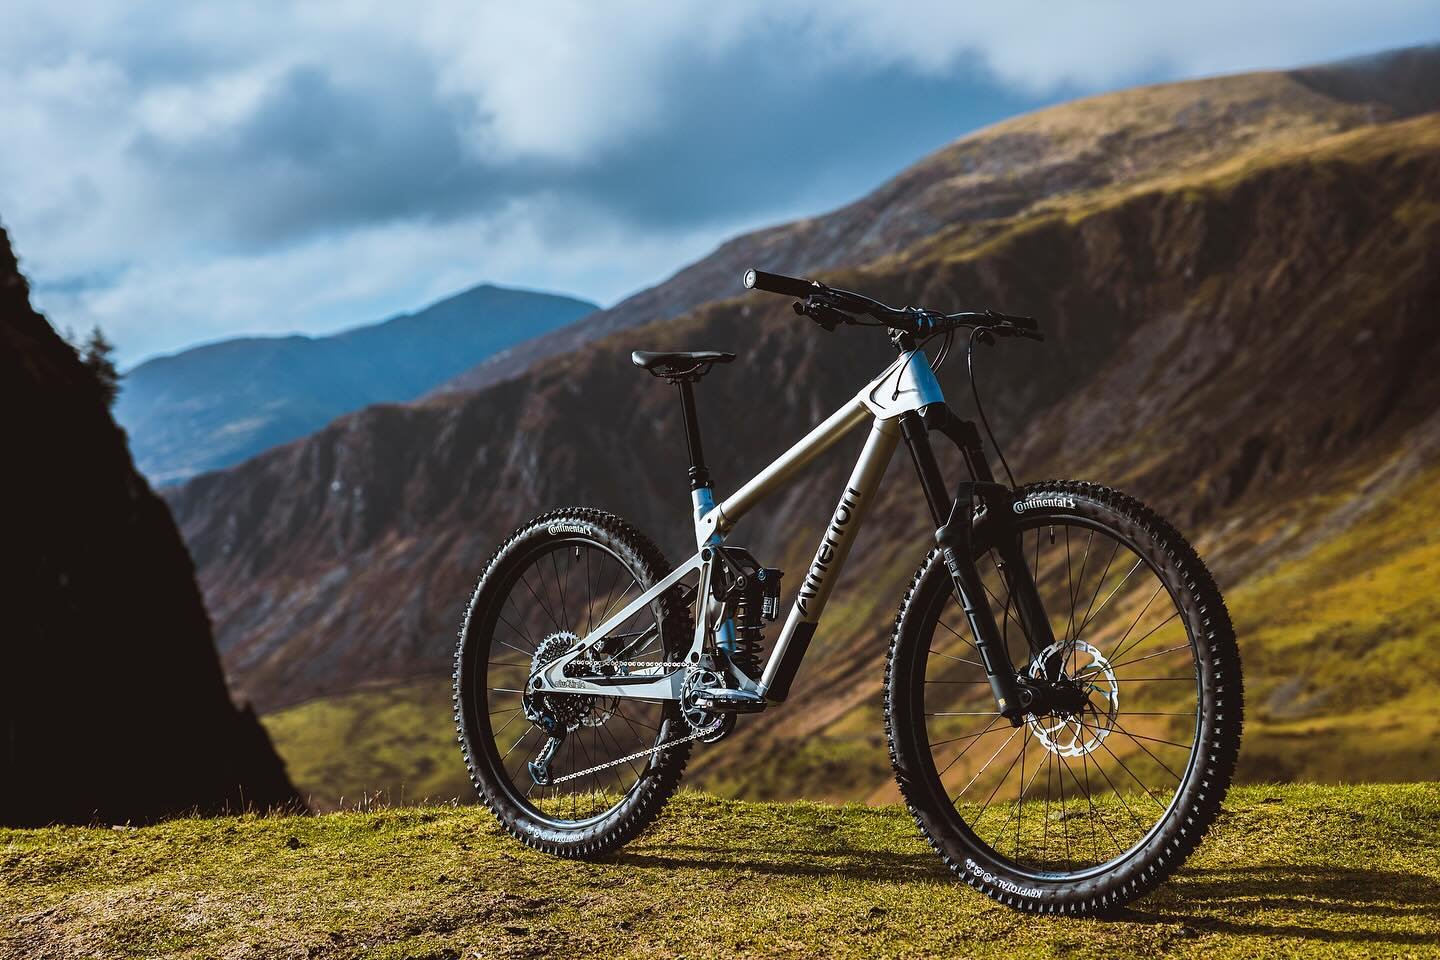 Introducing the S.170&hellip; 👀

It&rsquo;s been a lot of fun shooting this one through its development, and I&rsquo;m stoked to see things come together for the @athertonbikes team after all their work bringing it to life!